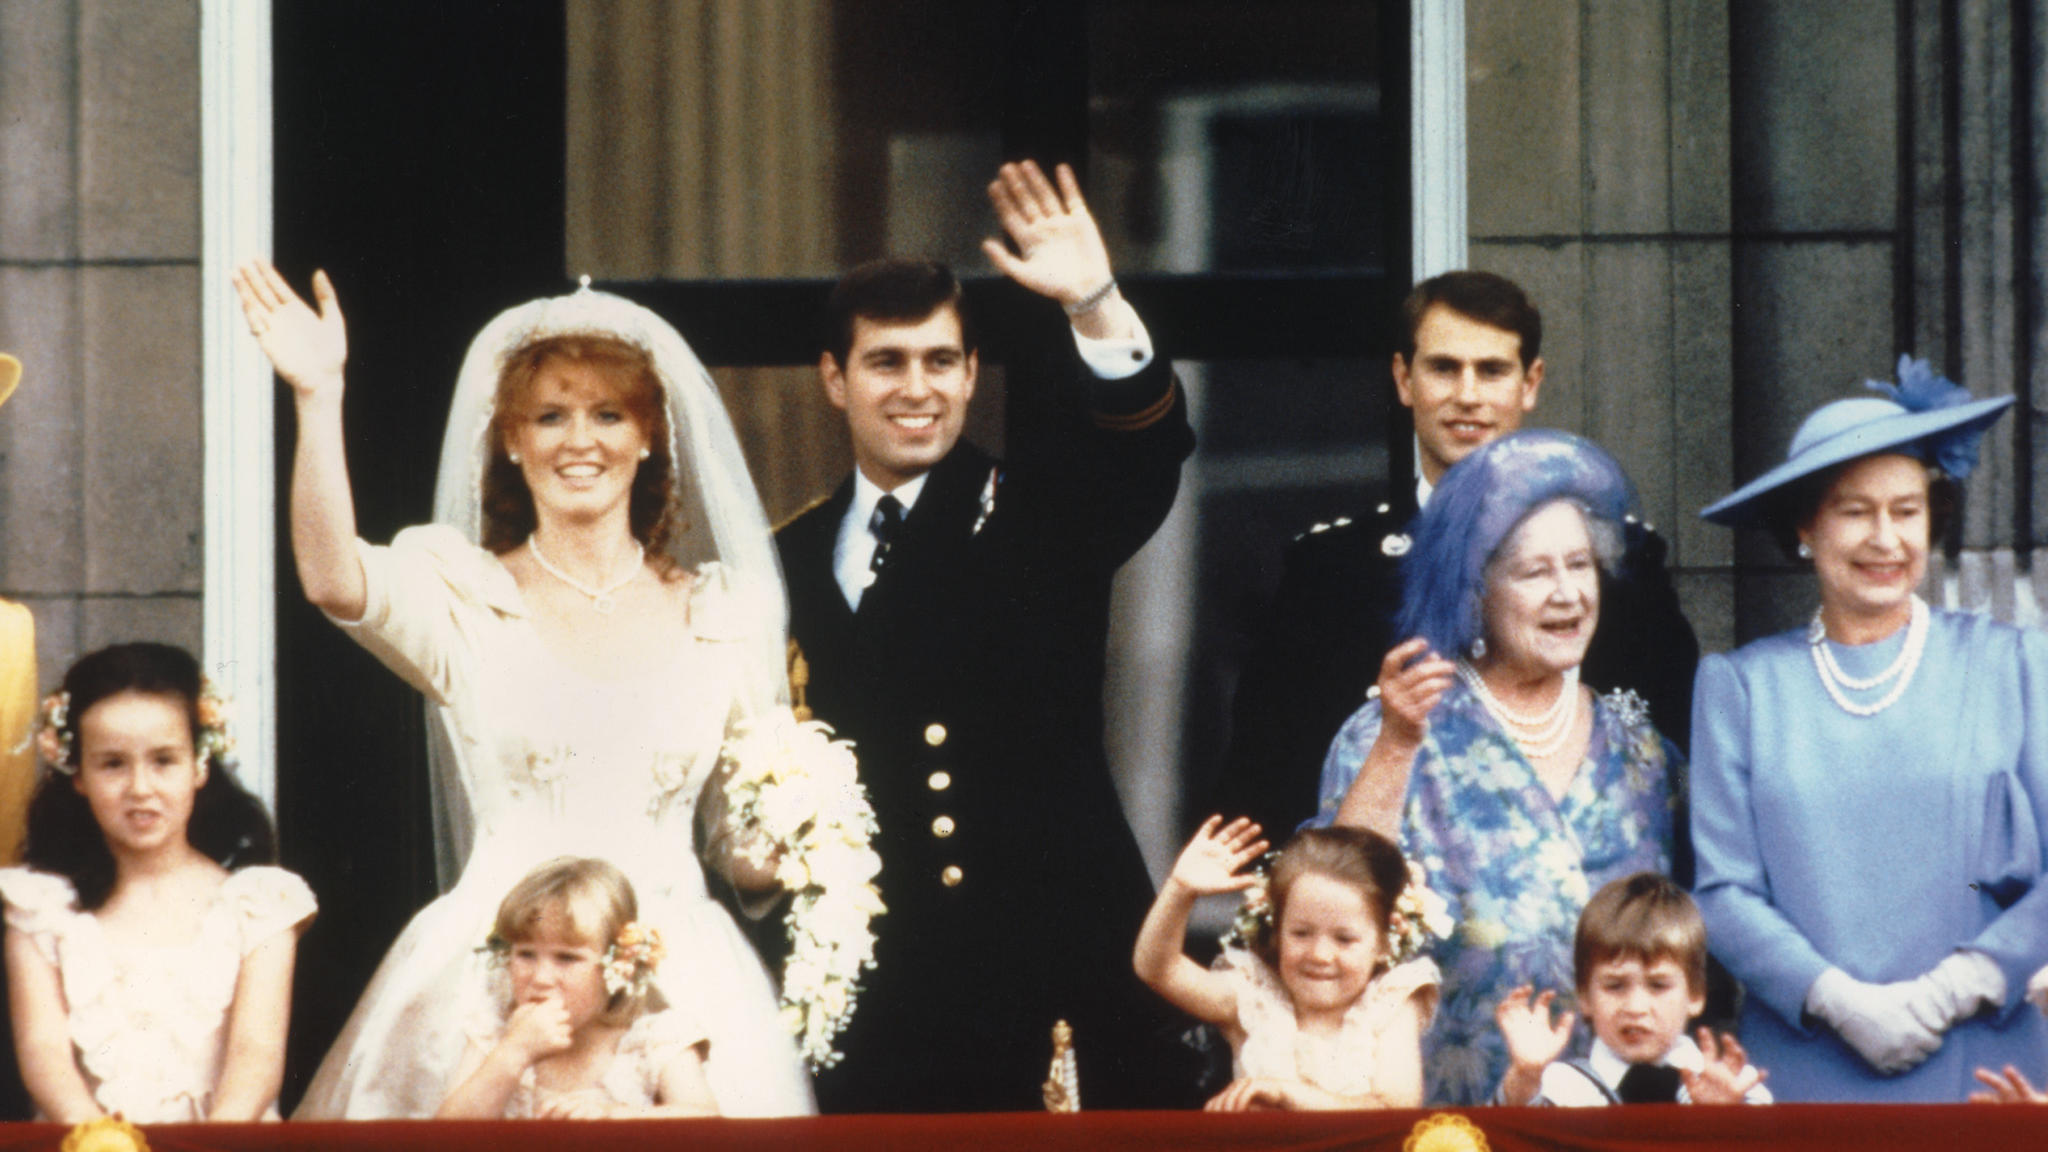 The newly wed Prince Andrew, the Duke of York and his wife Sarah Ferguson, the Duchess of York, wave to crowds 23 July 1986 from the balcony of Buckingham Palace in London while Queen Elizabeth II and Queen Mother look on. Prince Andrew desperately w